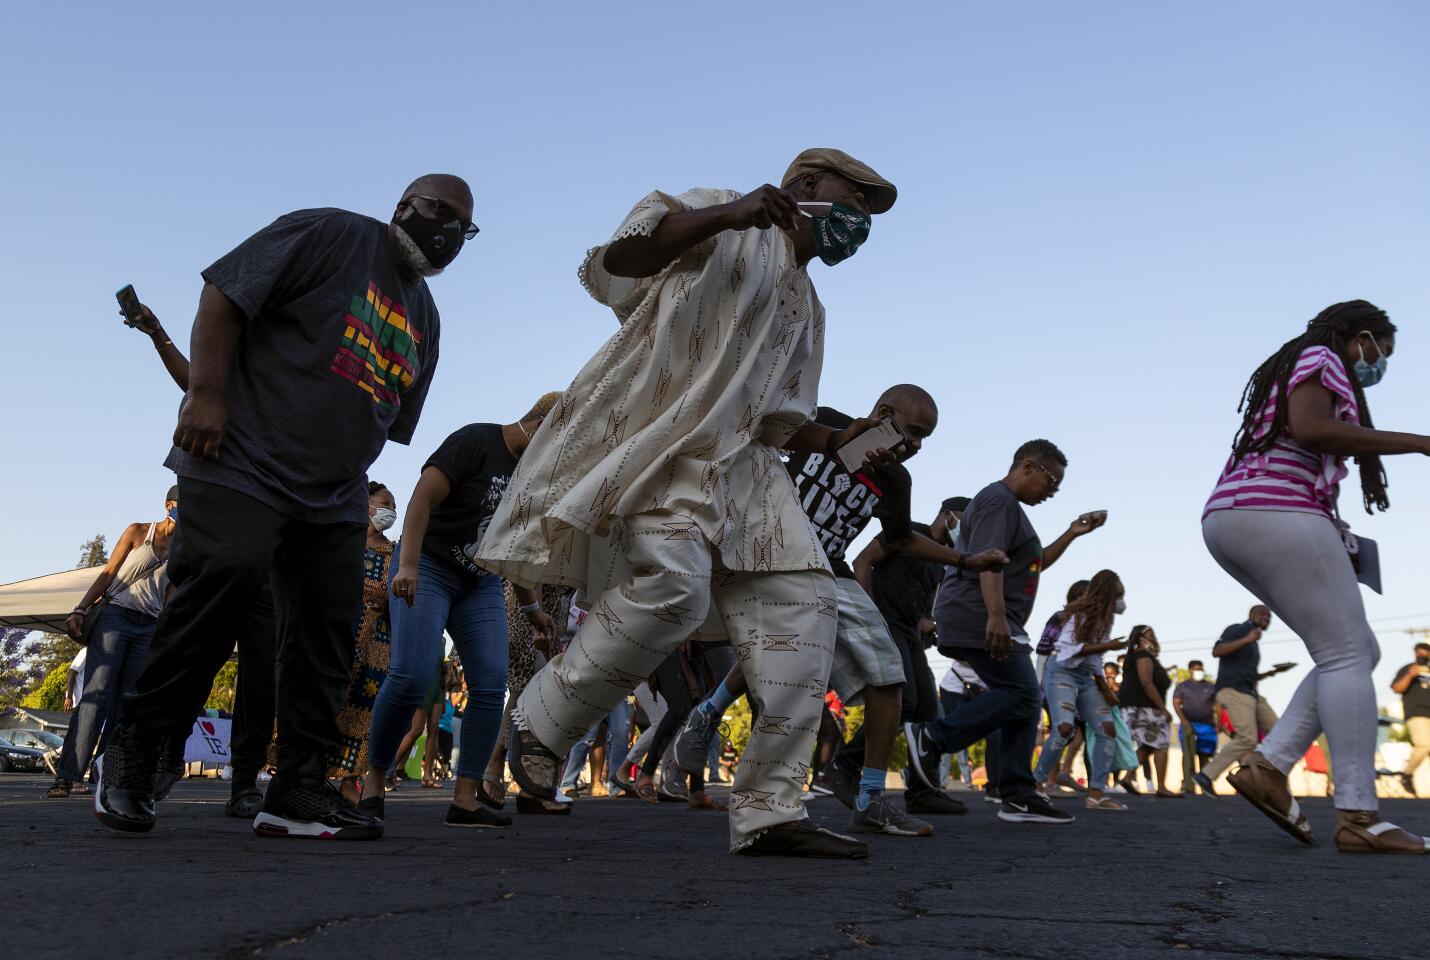 People gather for a group dance to enjoy the Juneteenth Freedom Celebration in Riverside